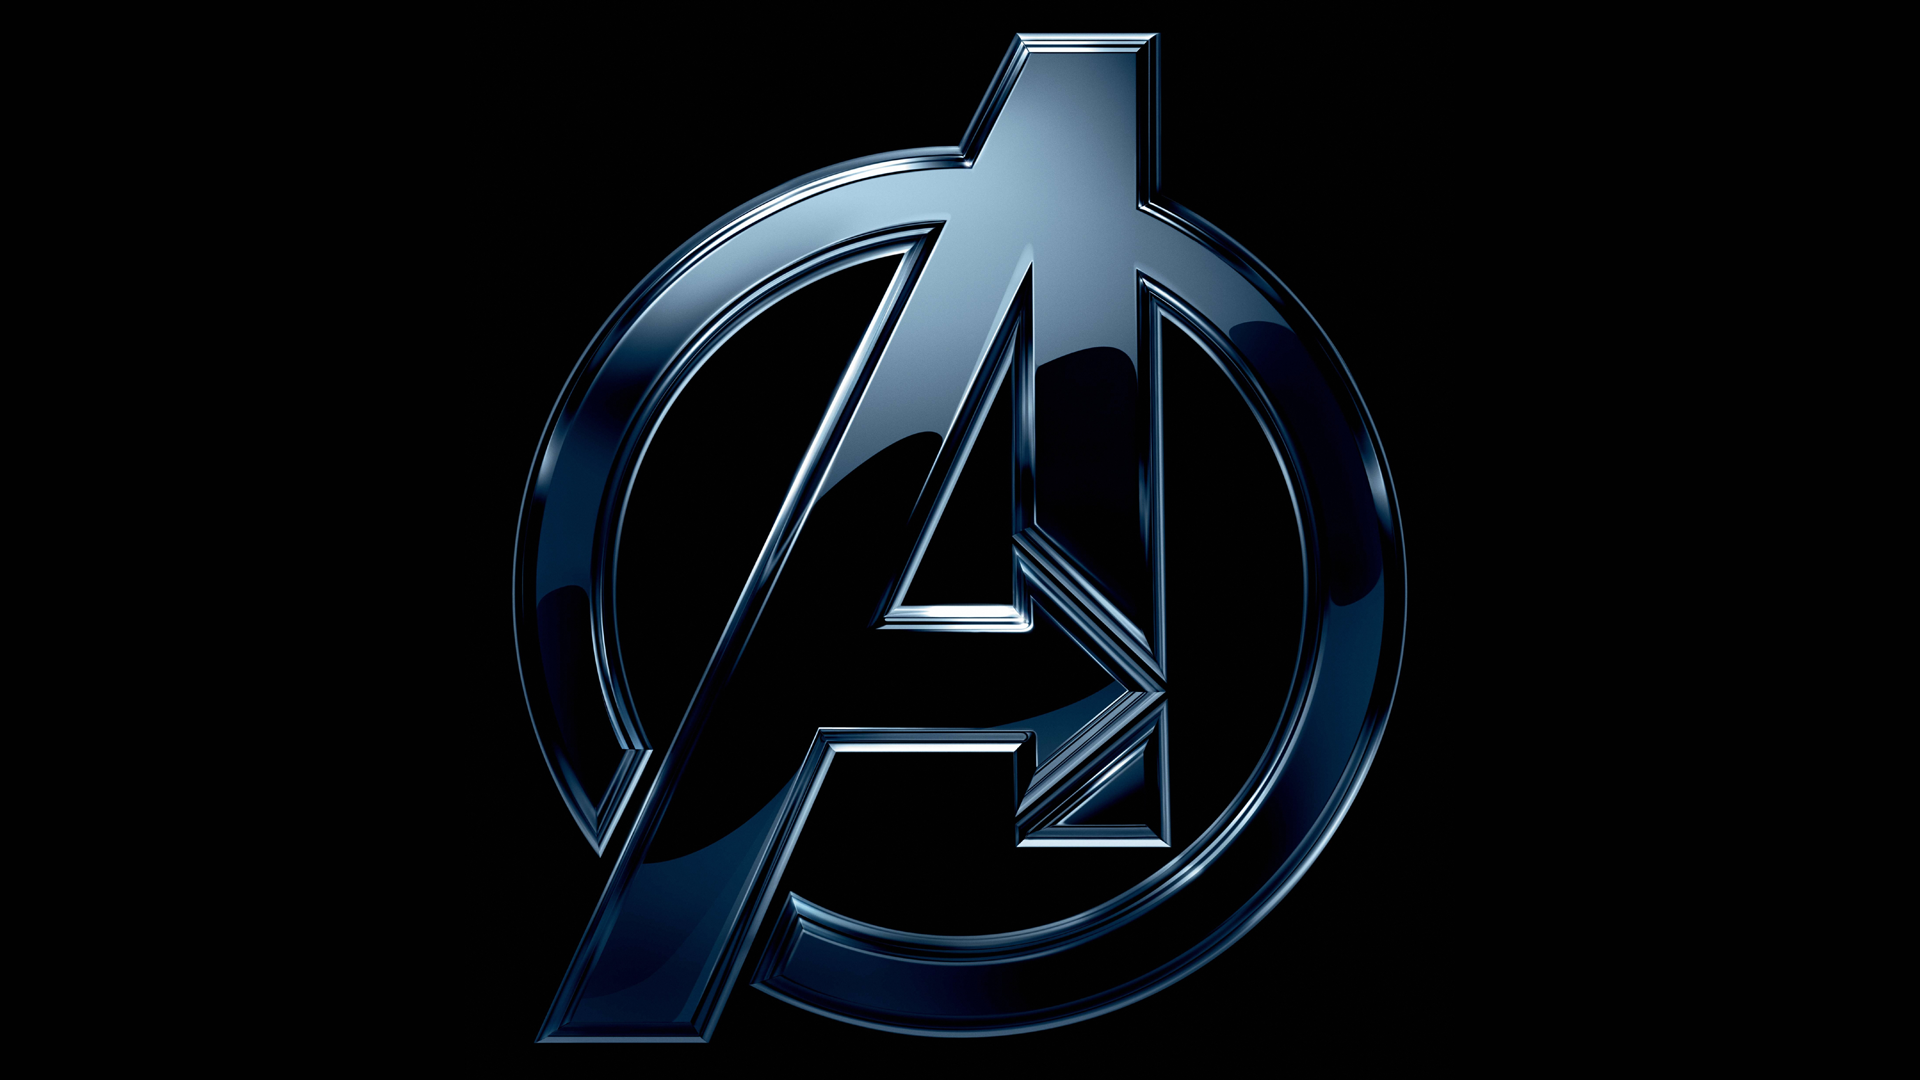 the_avengers_logo_by_wolverine080976-d4rpr10.png